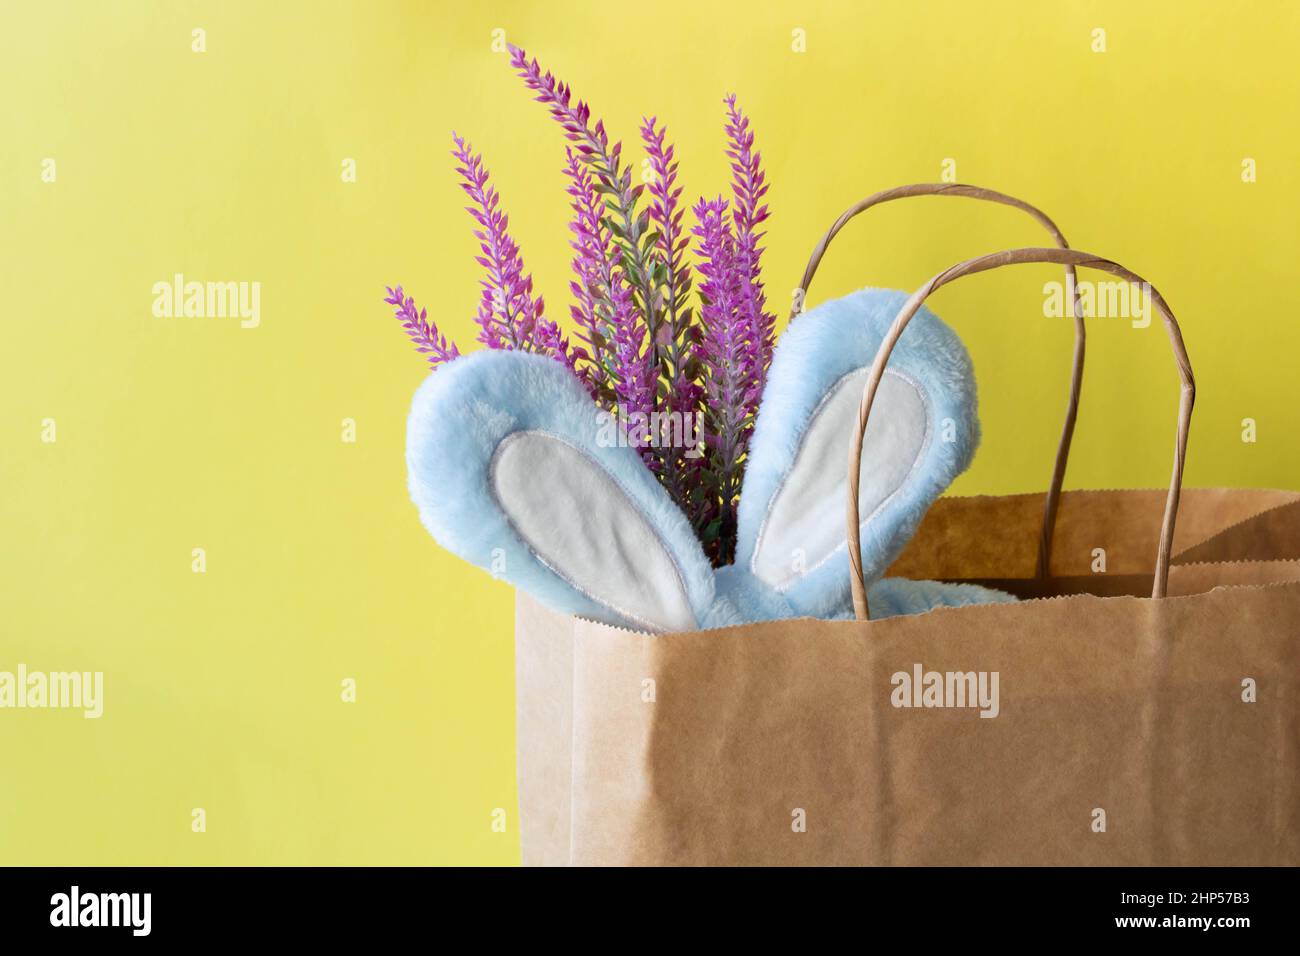 A bandage, blue rabbit ears and an artificial lavender branch stick out of the package. Easter greeting card design. Space for text. Stock Photo